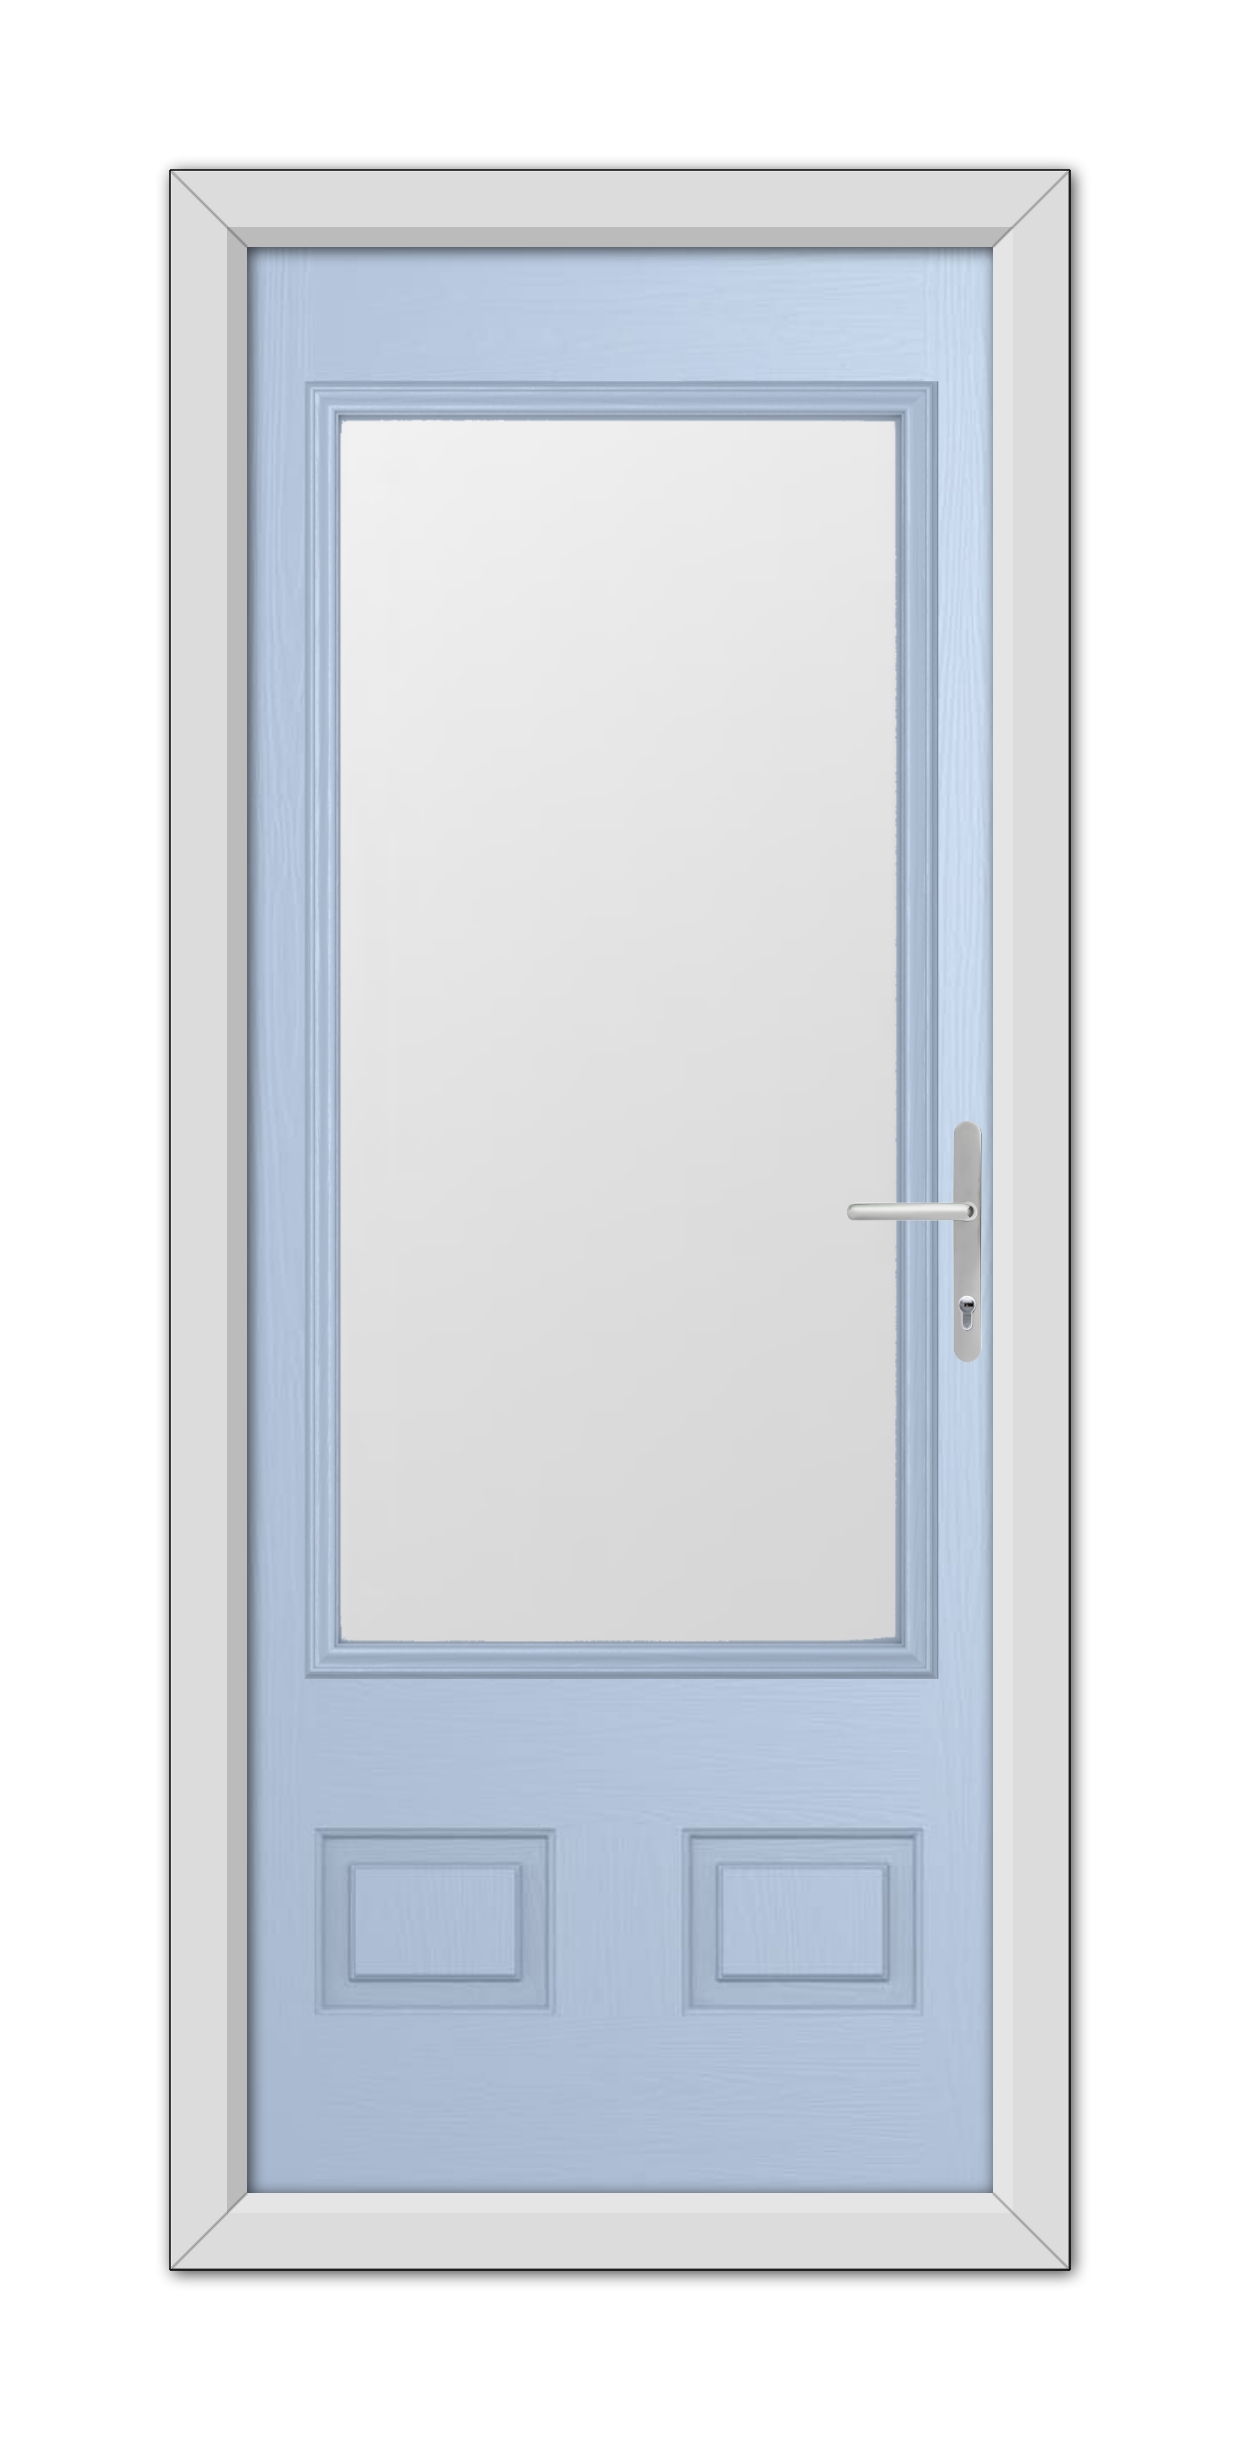 A modern Duck Egg Blue Walcot Composite Door with a rectangular design and a white handle, set within a white frame, isolated on a white background.